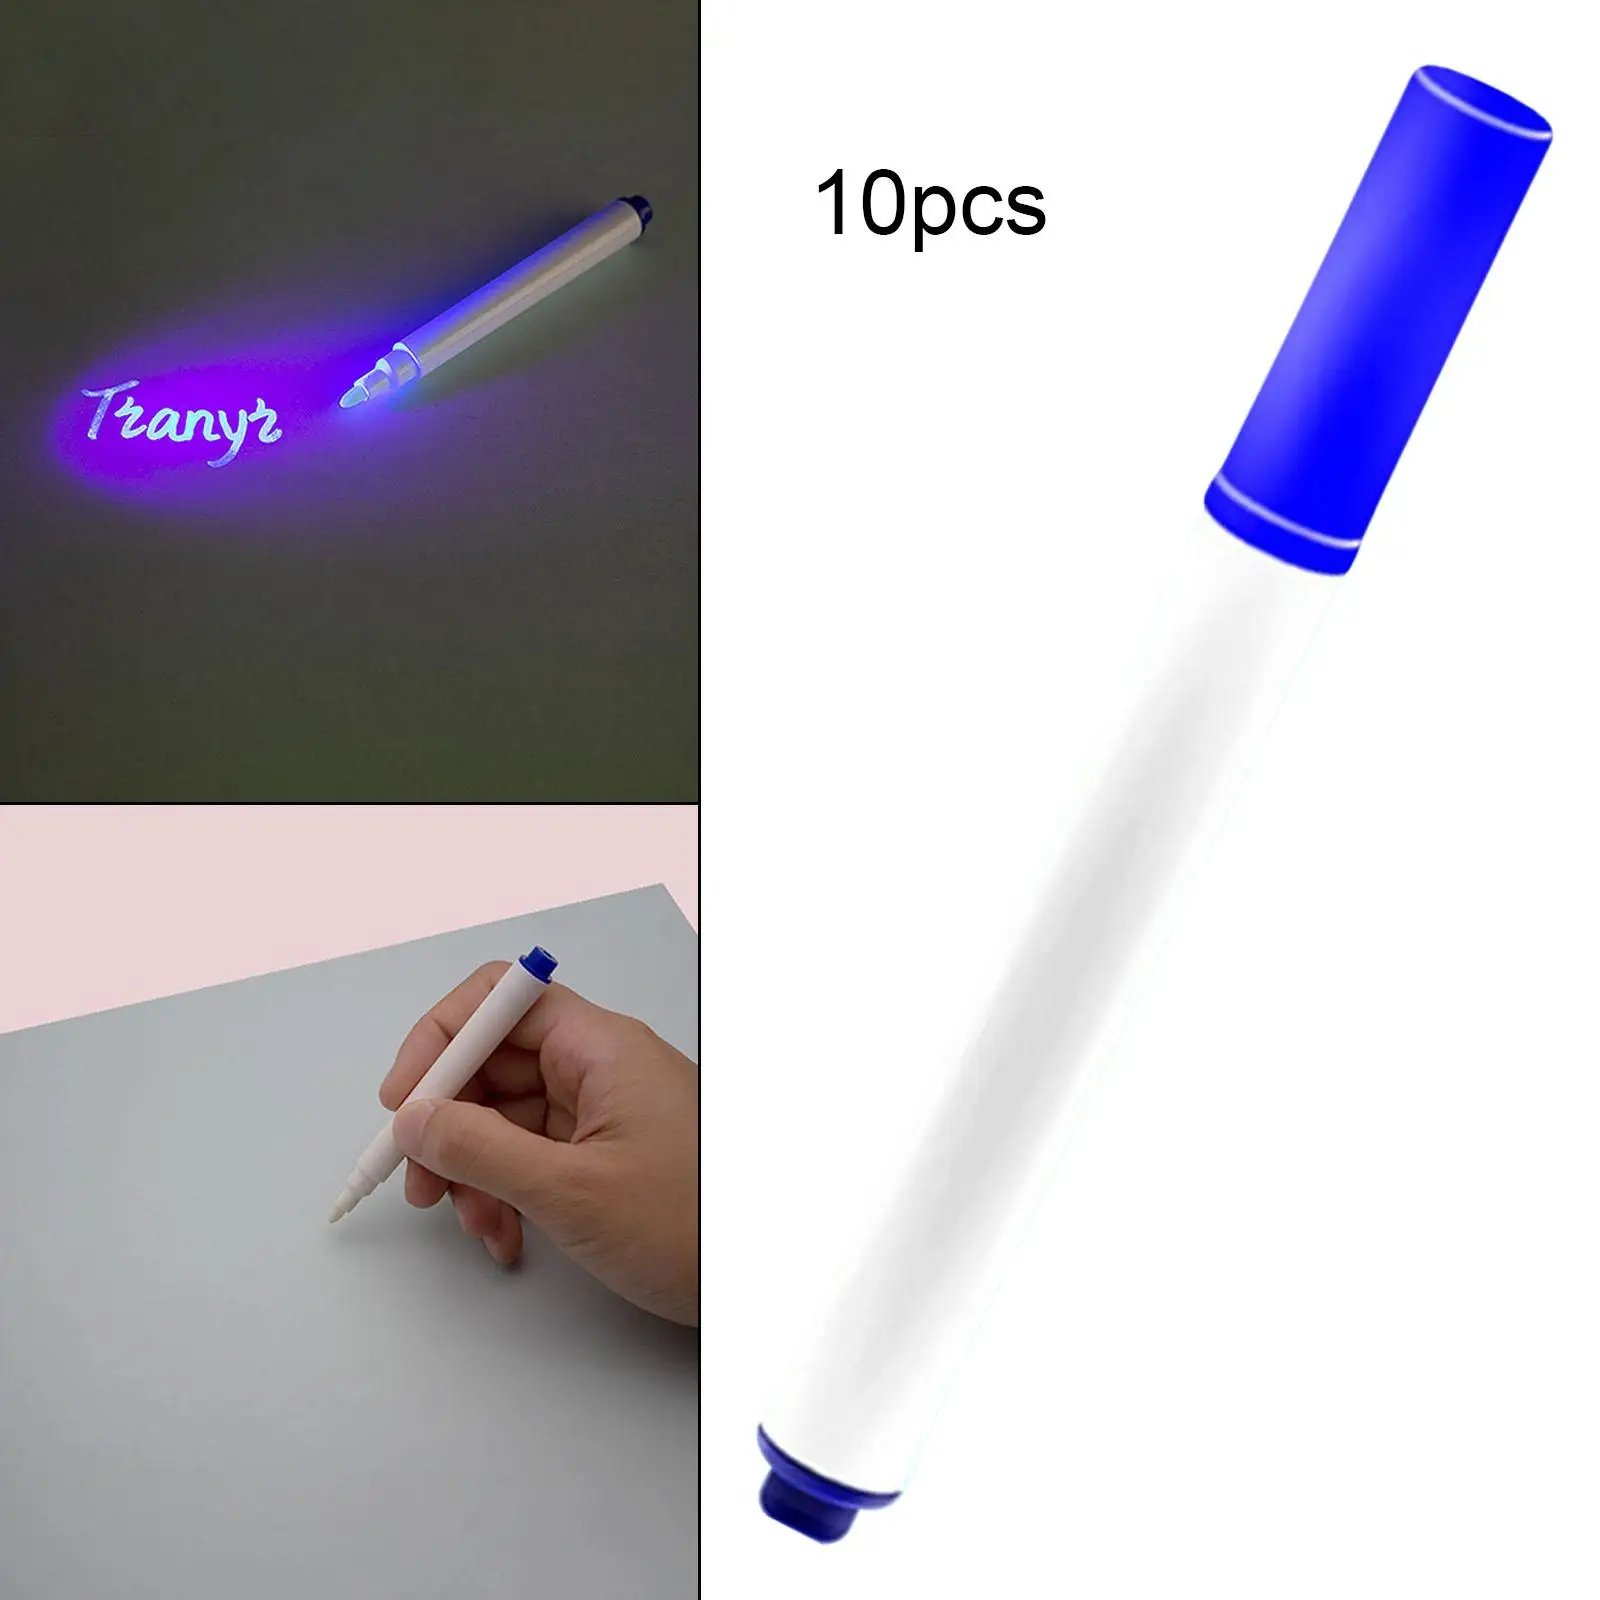 10Pcs Invisible Ink Pen Marker Pens 0.5cm Round Tip Painting Drawing Writing for Birthday Notes Doodle Graffiti Message